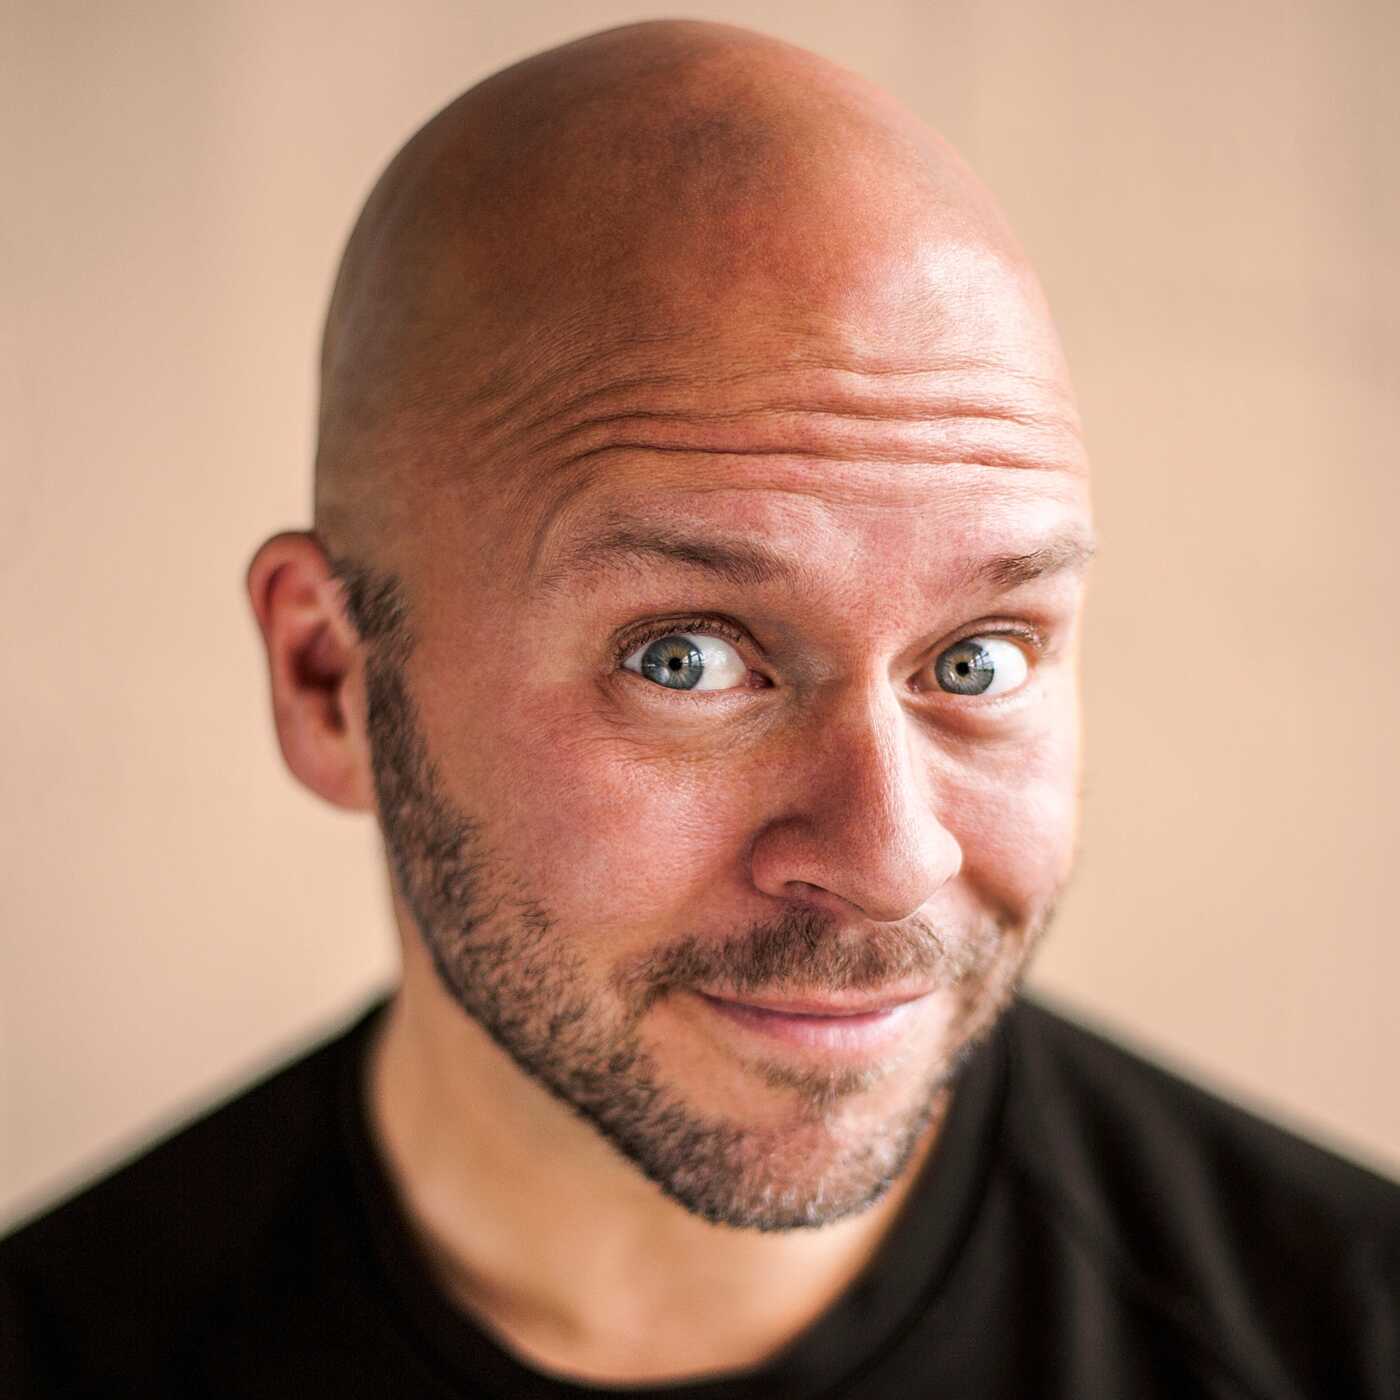 Derek Sivers Moved His Family from Singapore to New Zealand for the Nature